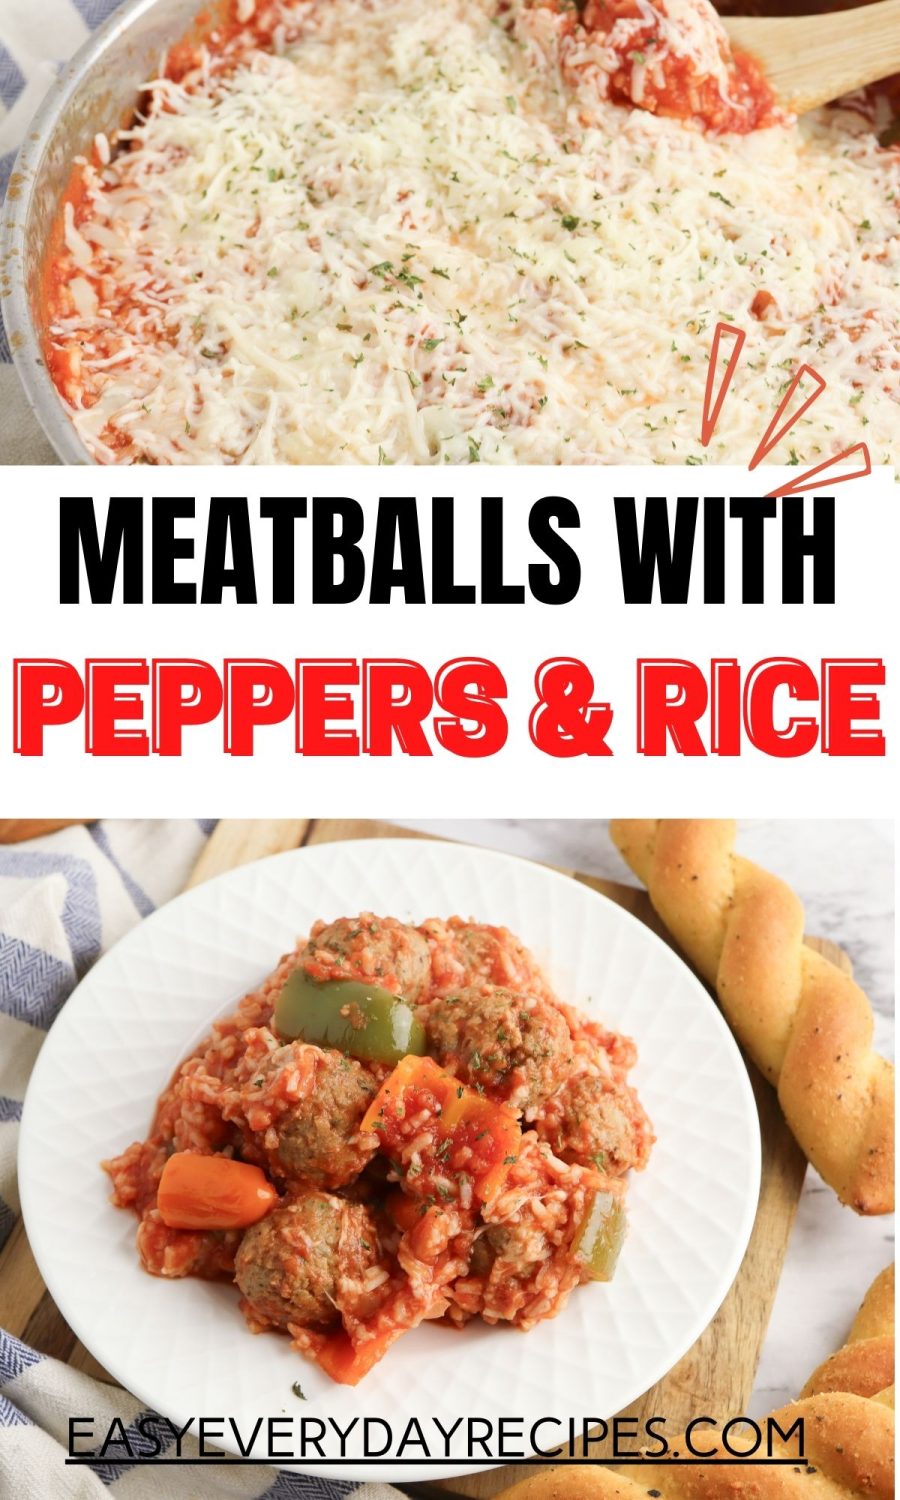 Meatballs with peppers and rice.